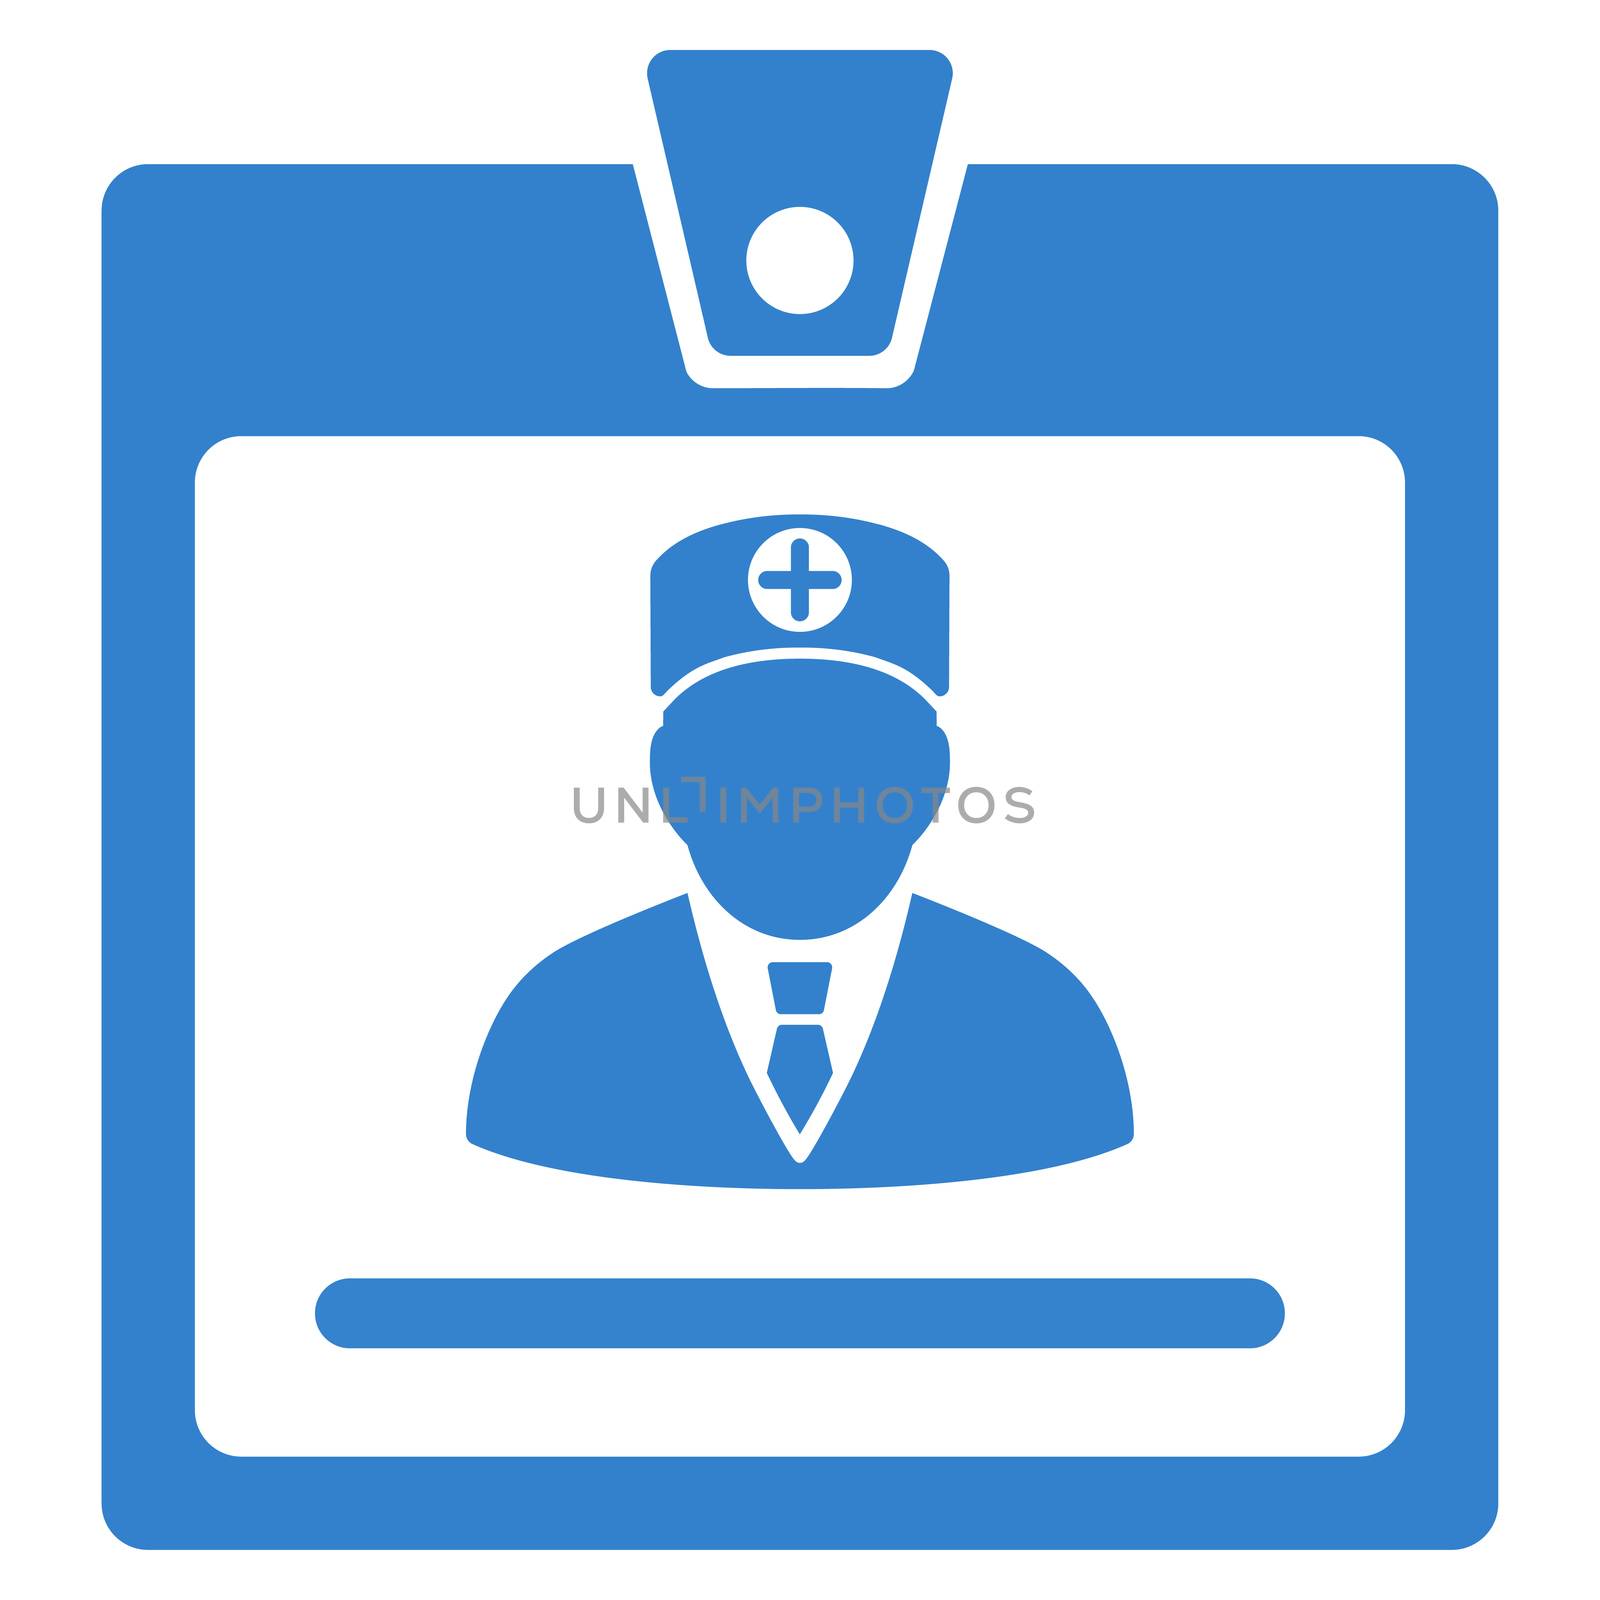 Doctor Badge raster icon. Style is flat symbol, cobalt color, rounded angles, white background.